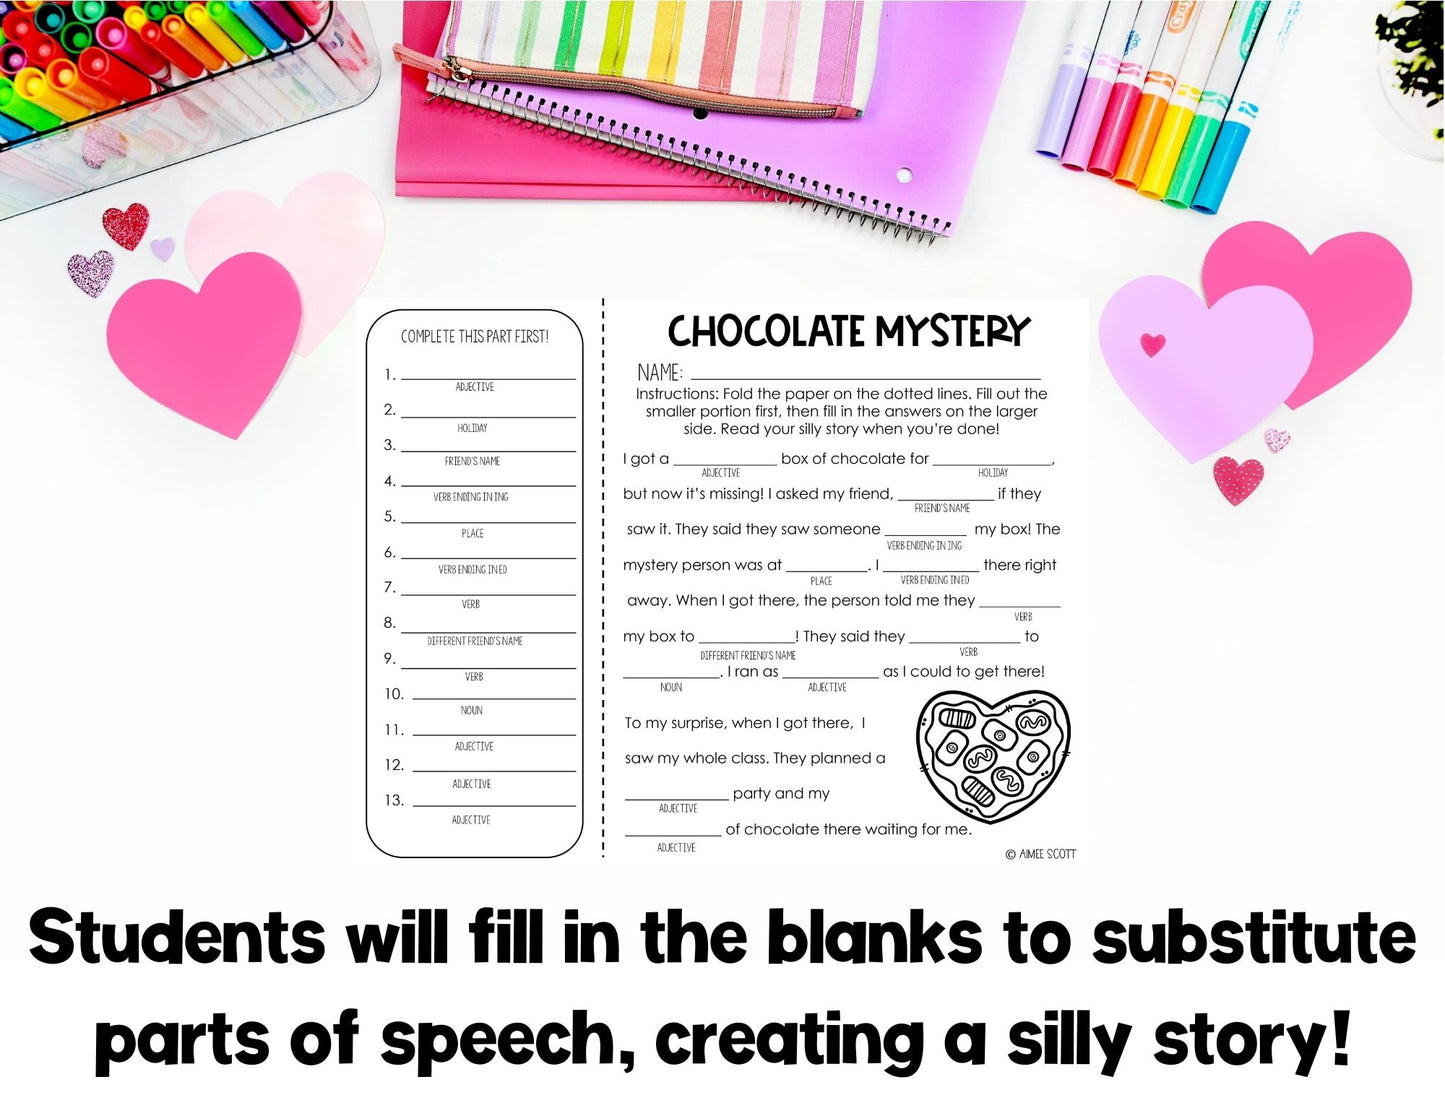 Valentine's Day Activities | Parts of Speech | Mad Libs Game